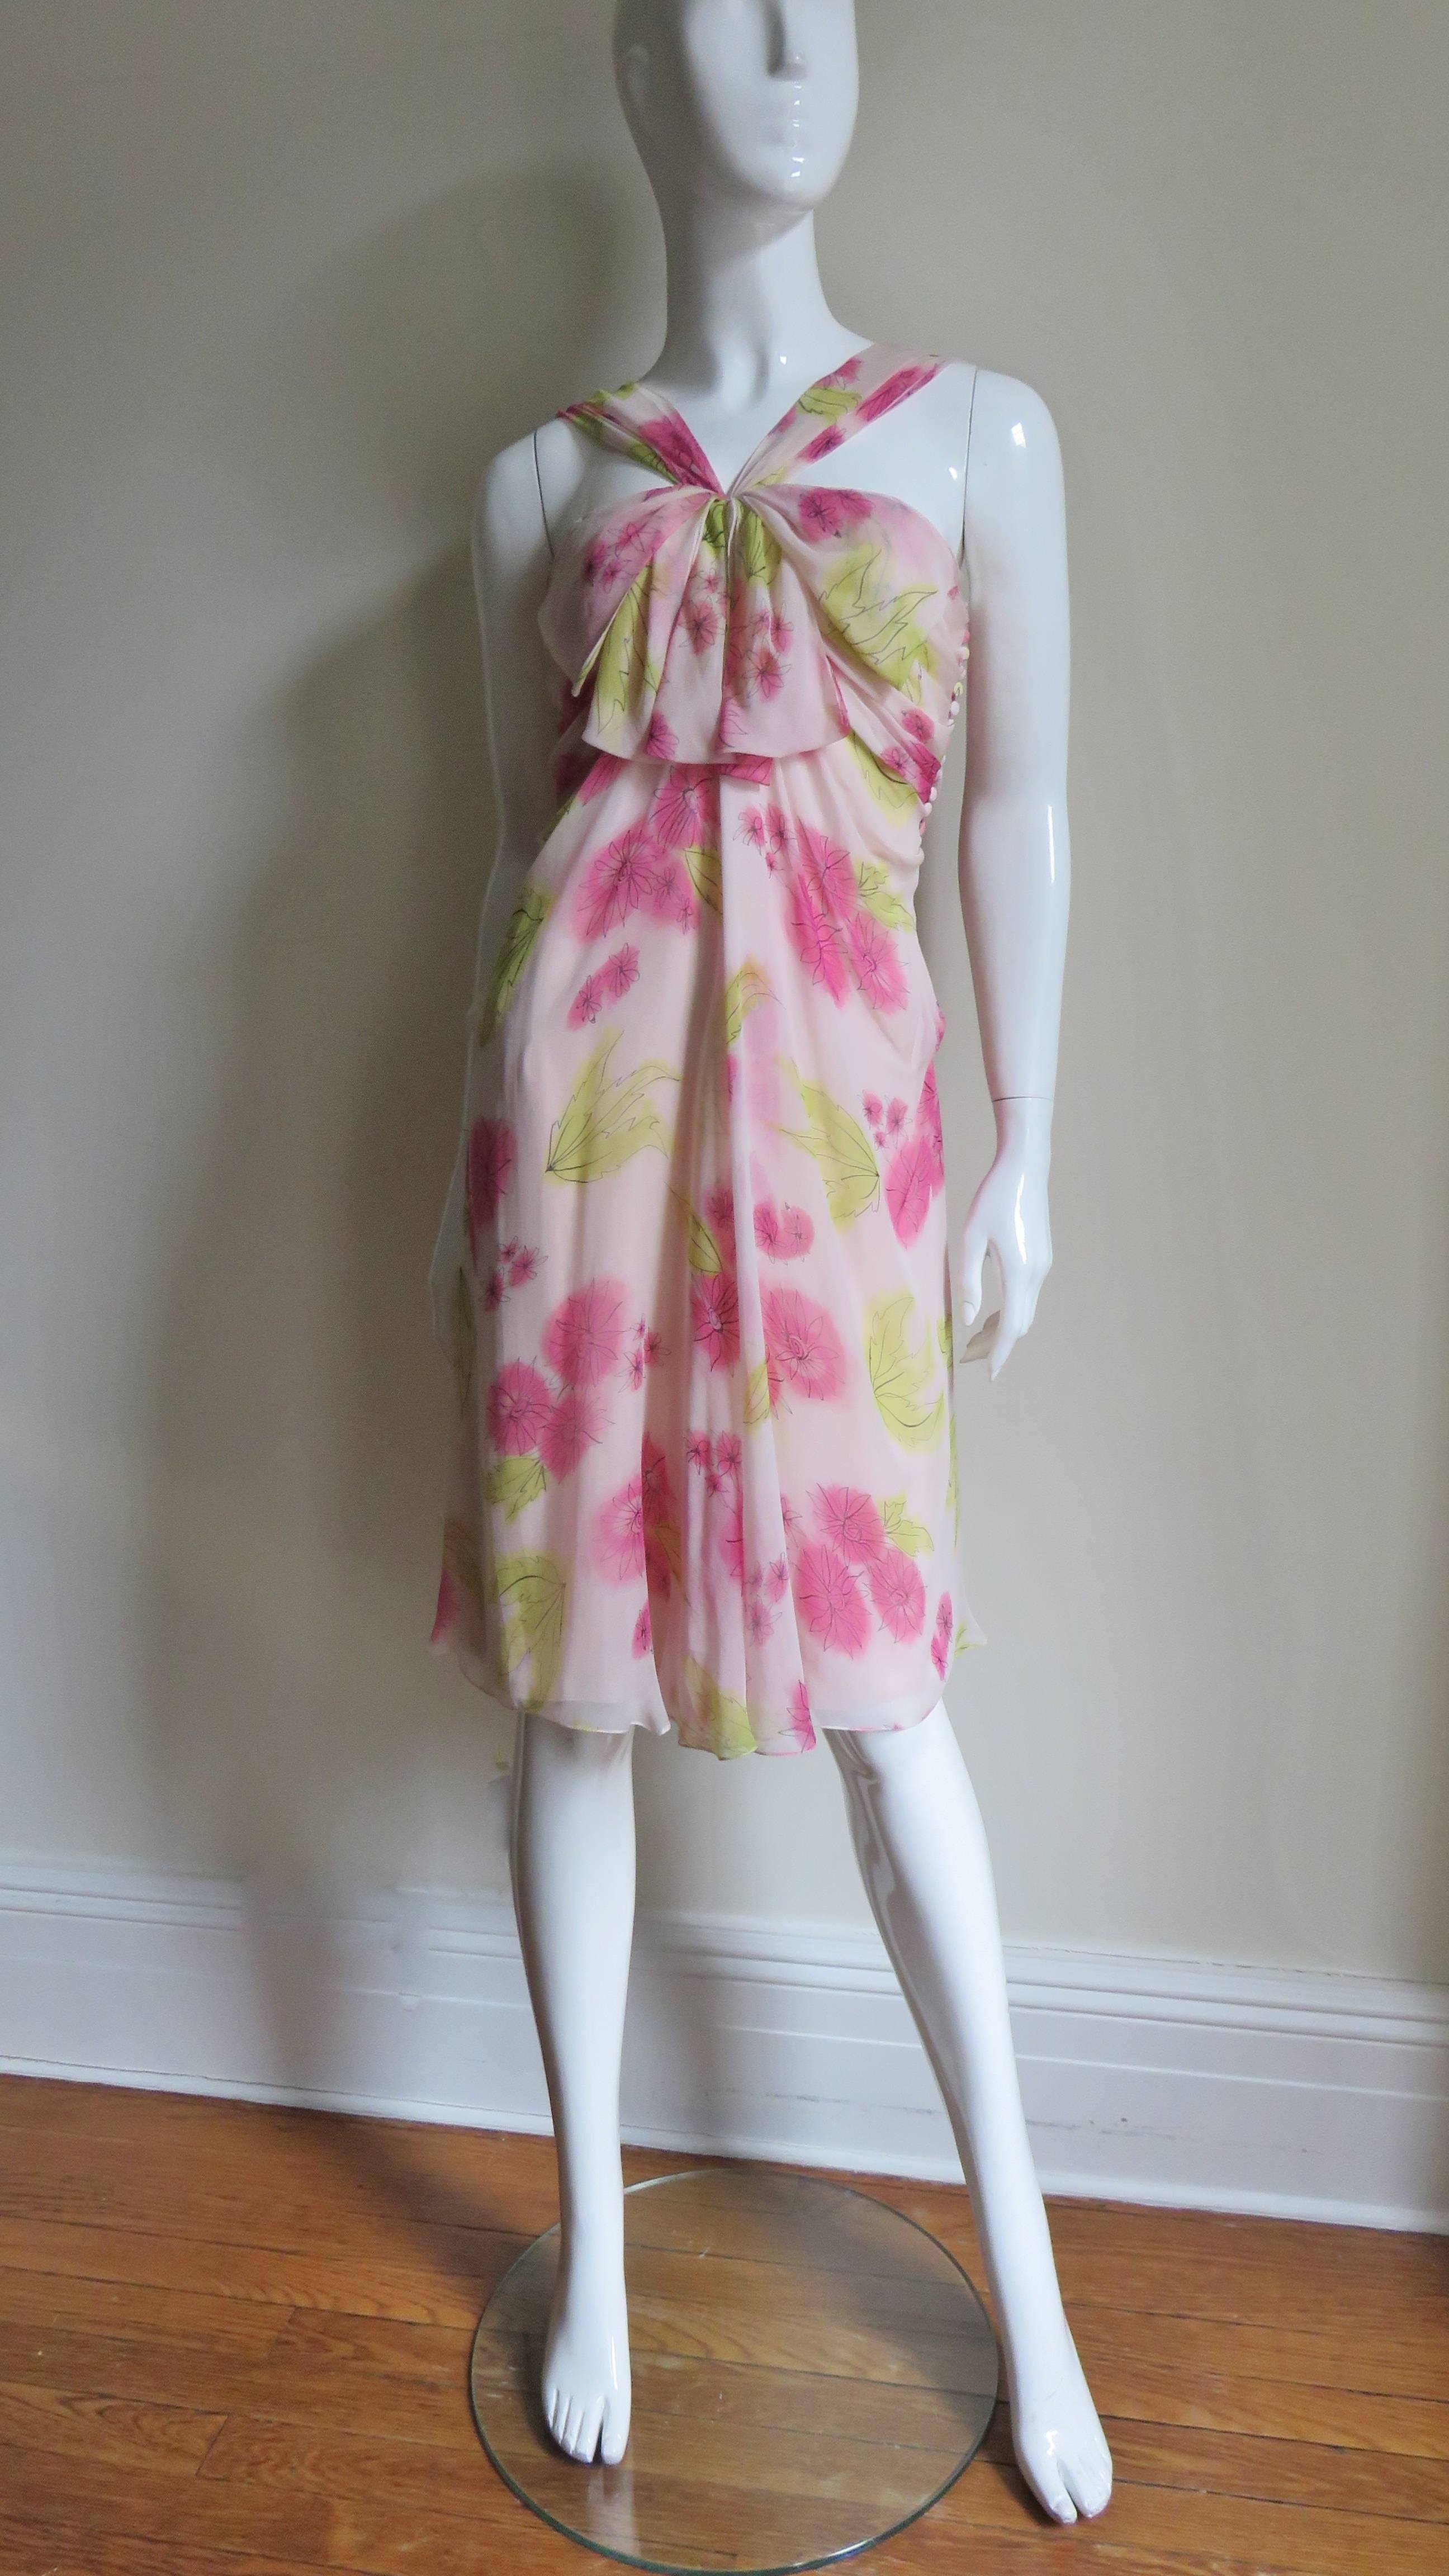 John Galliano for Christian Dior Pink Silk Flower Dress In Good Condition For Sale In Water Mill, NY